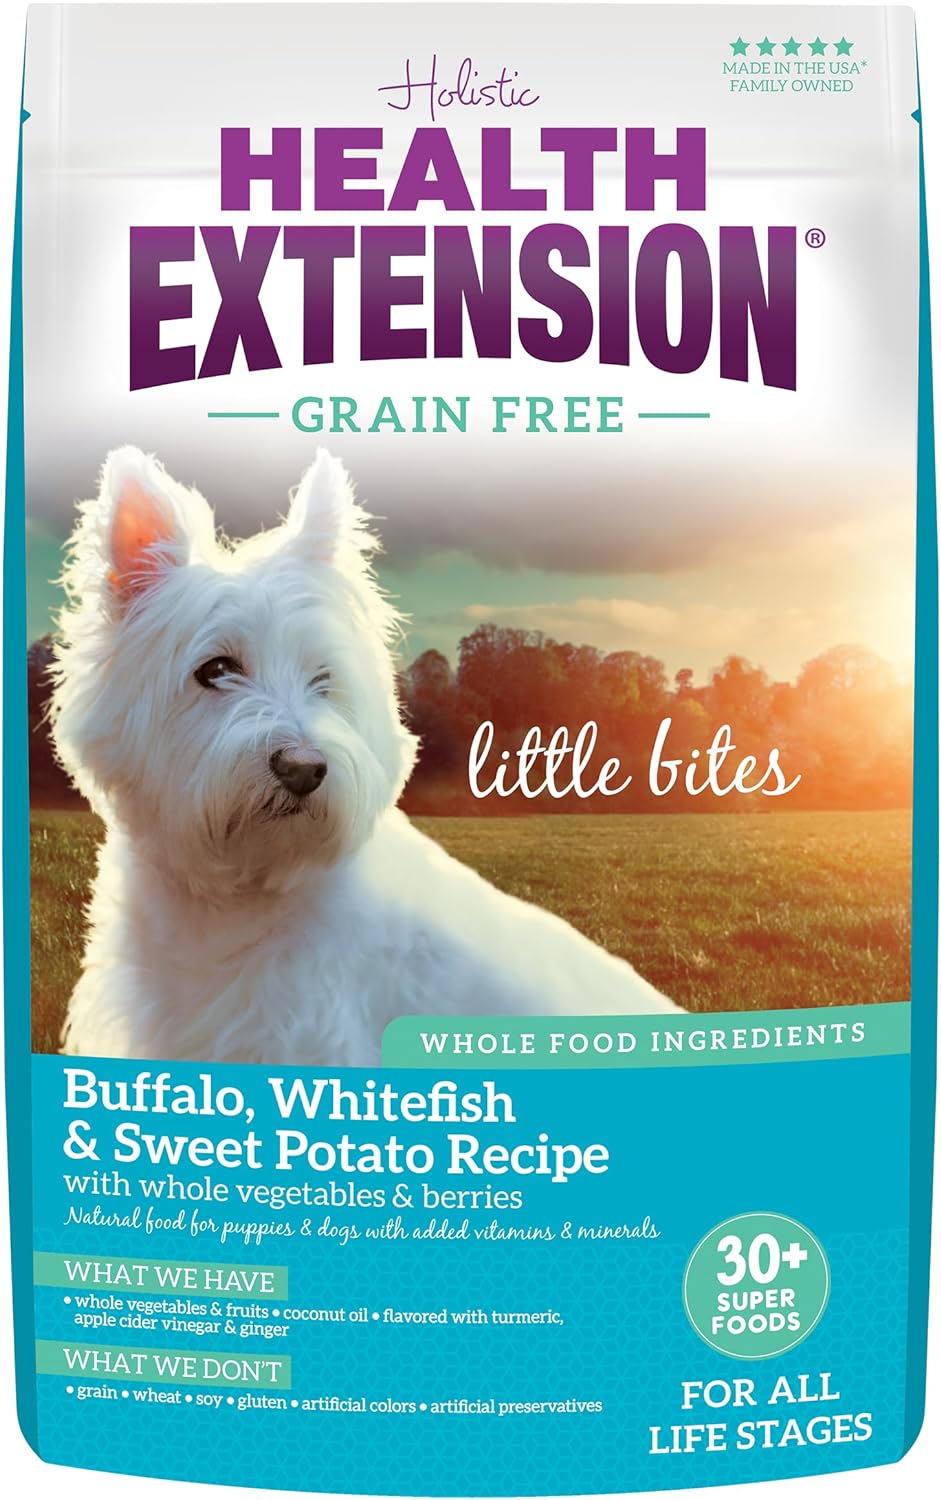 Health Extension Little Bites Dry Dog Food, Natural Food with Vitamins, Suitable for All Puppies, Grain Free Buffalo, Whitefish & Sweet Potato Recipe with Whole Vegetable & Berries (1 Pound / 0.4 kg)